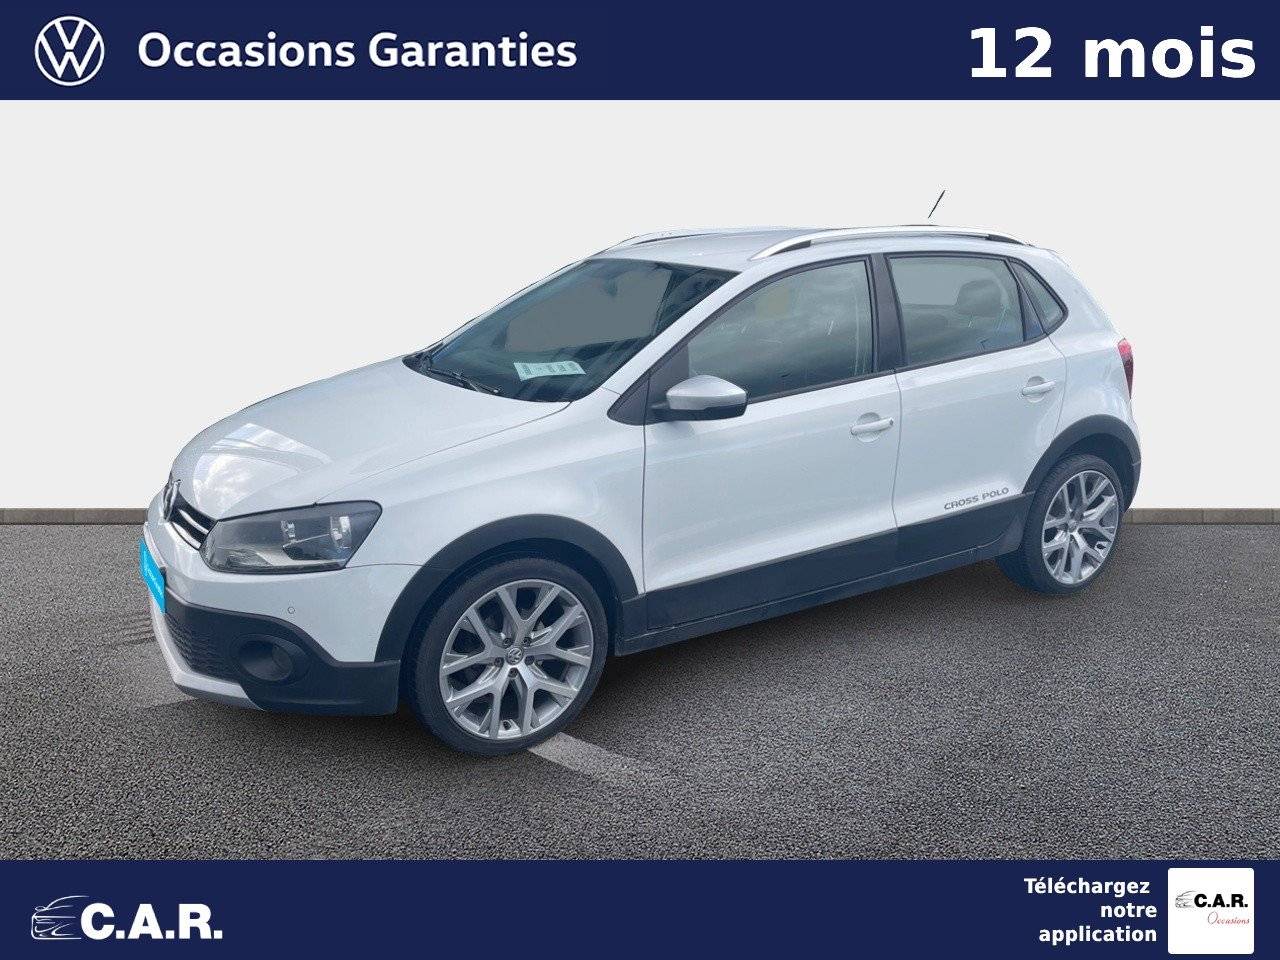 Occasion VOLKSWAGEN Polo 1.4 TDI 90 BlueMotion Technology